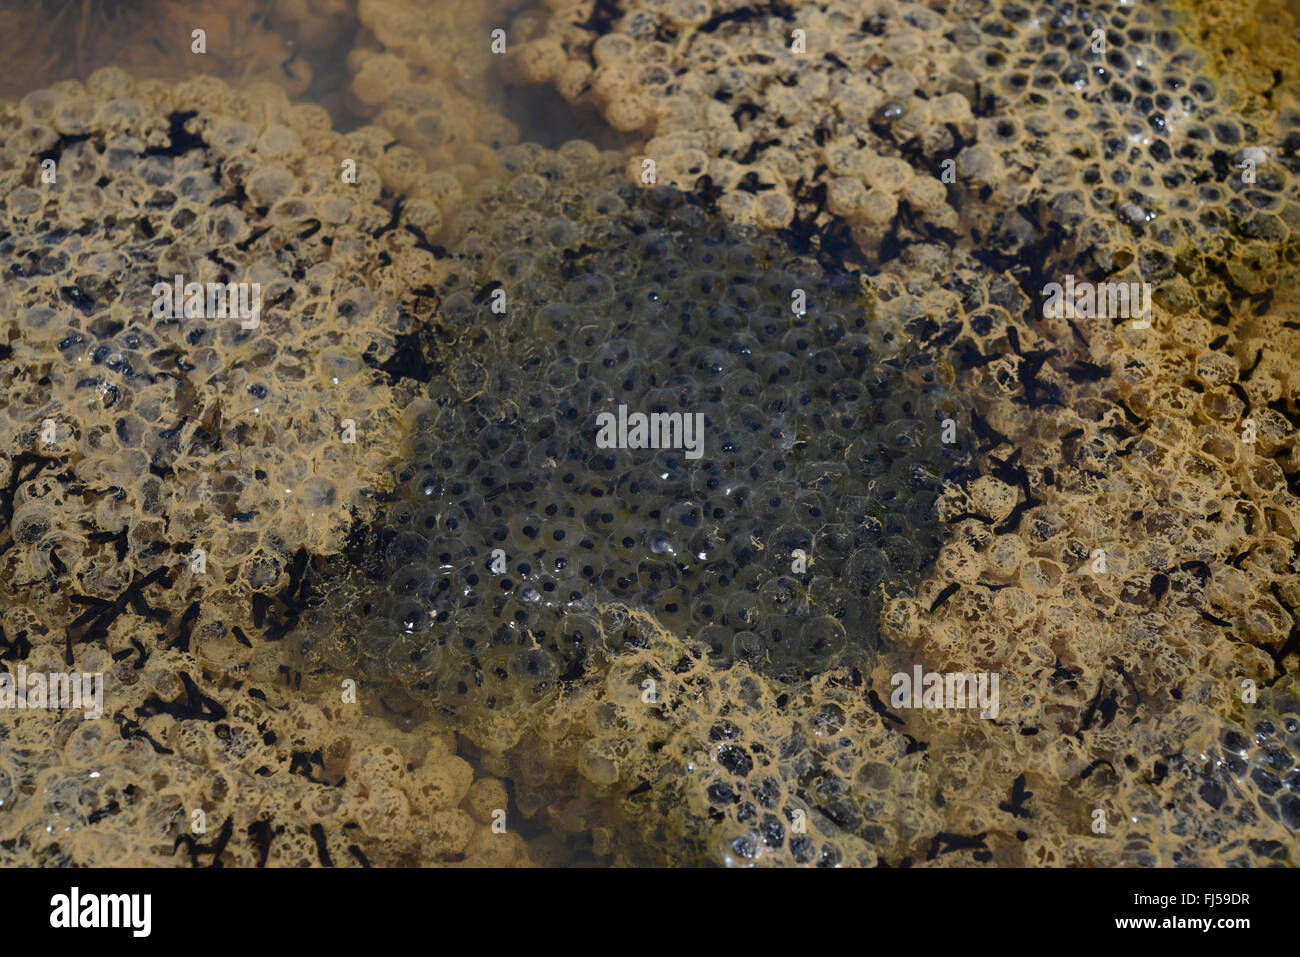 common frog, grass frog (Rana temporaria), lots of frog eggs in a muddy puddle, Romania, Karpaten Stock Photo